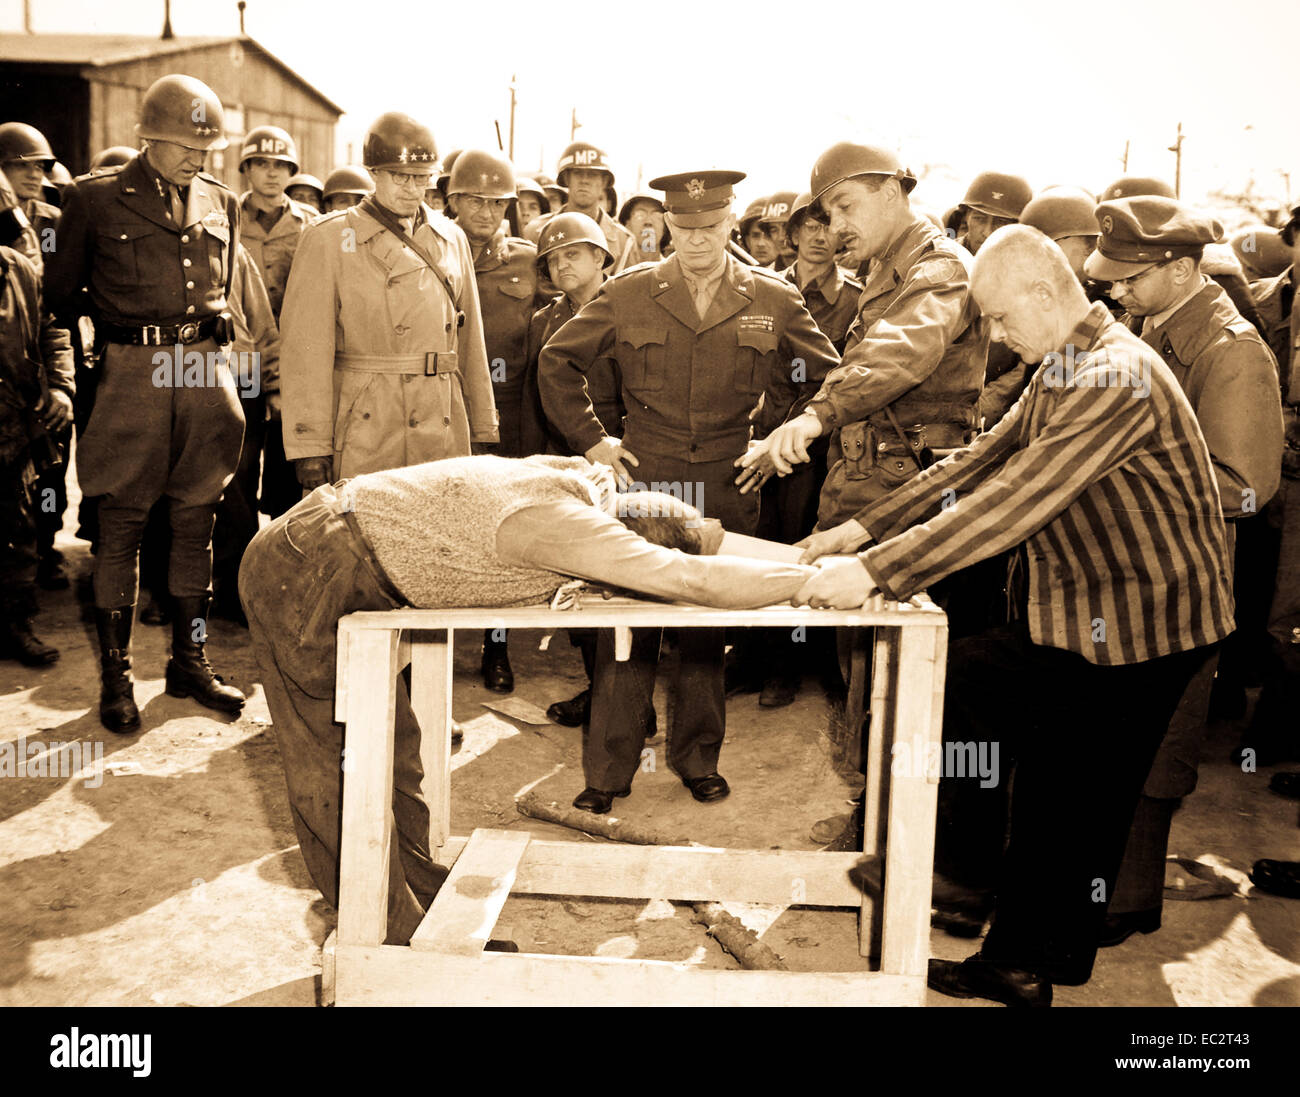 Gen. Dwight D. Eisenhower watches grimly while occupants of a German concentration camp at Gotha demonstrate how they were tortured by the Nazi sadists operating the camp.  Generals Bradley and Patton are at his right.  Germany, April 12, 1945.  Lt. Moore.  (Army) Stock Photo